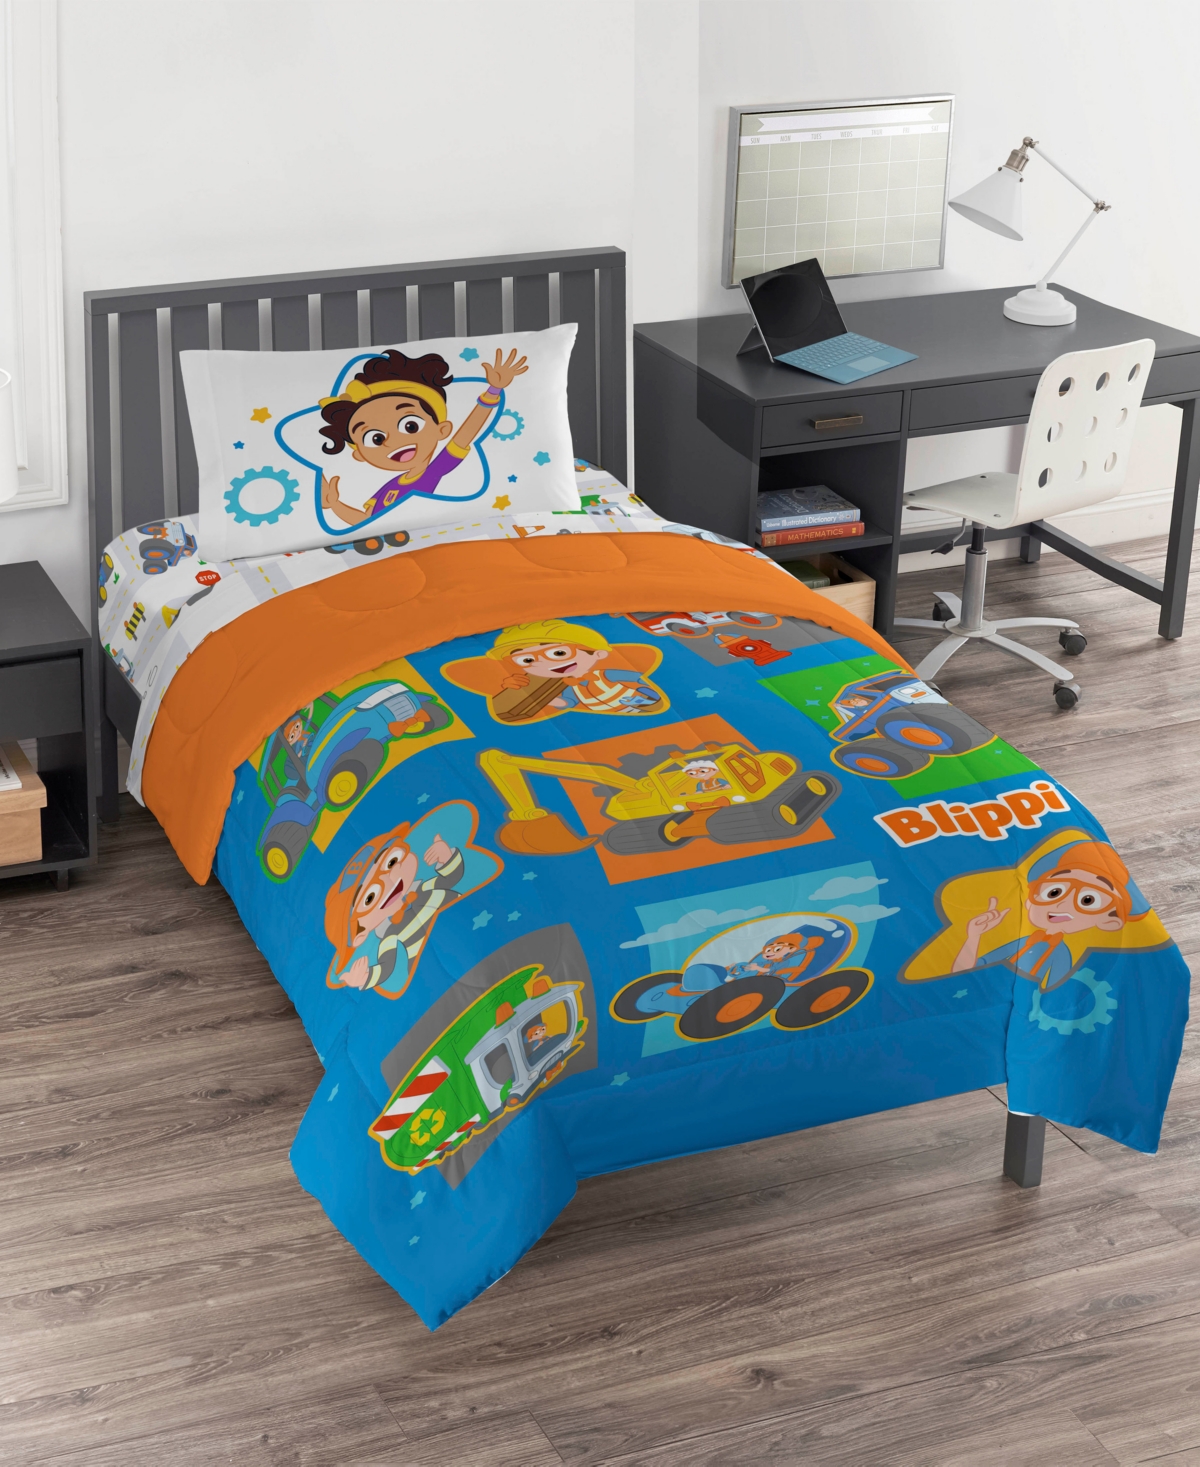 Blippi Moonbug How Does This Work 4 Piece Comforter Set, Toddler In Blue